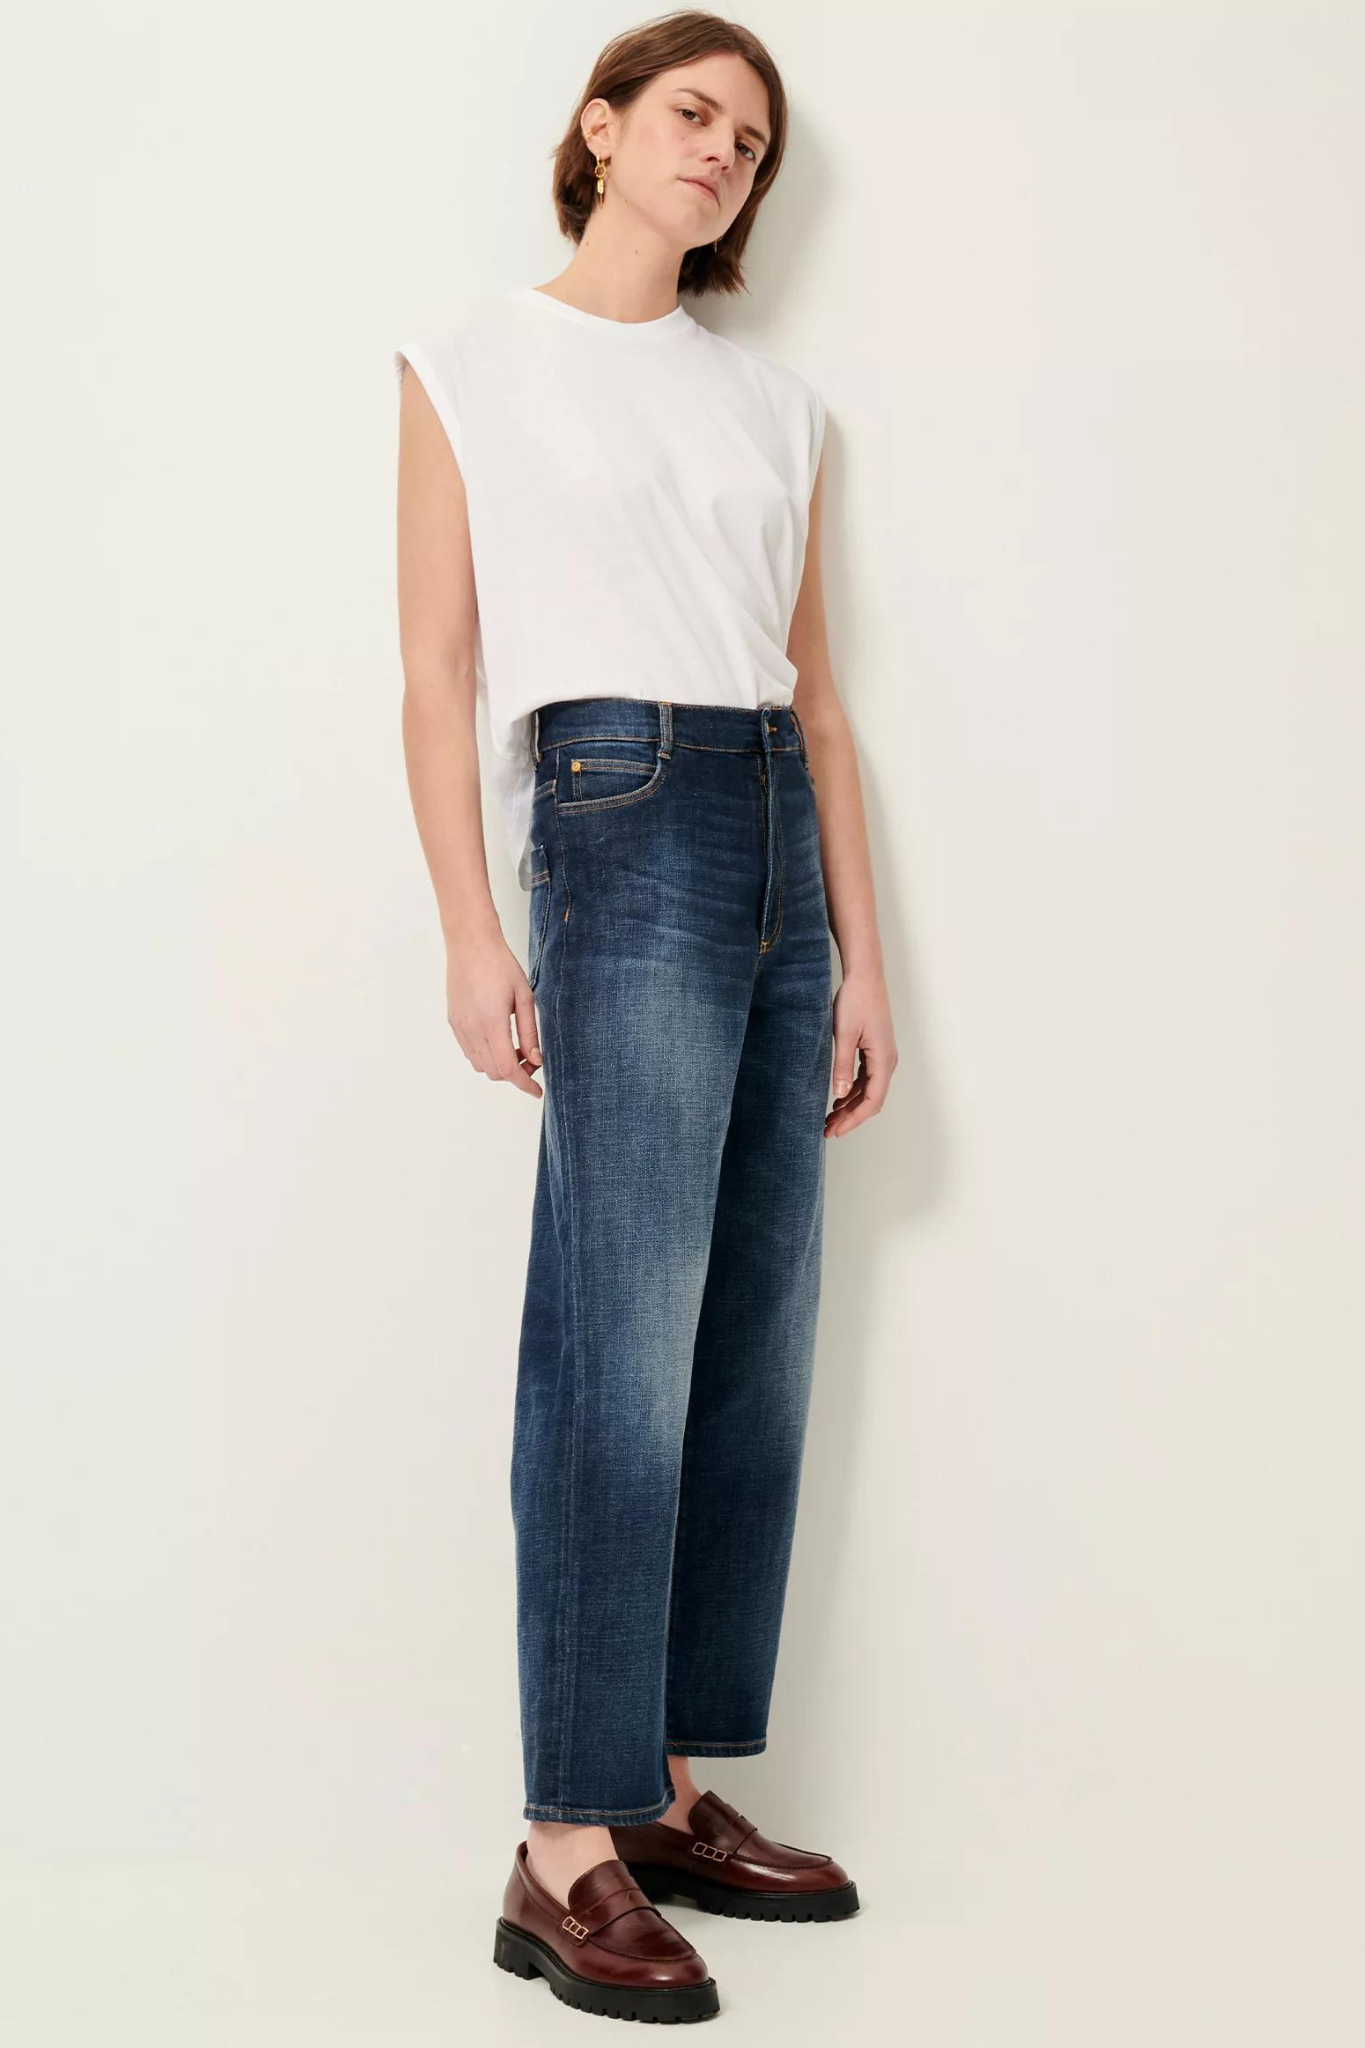 BAY CRUISE JEANS - MELODY BLUE